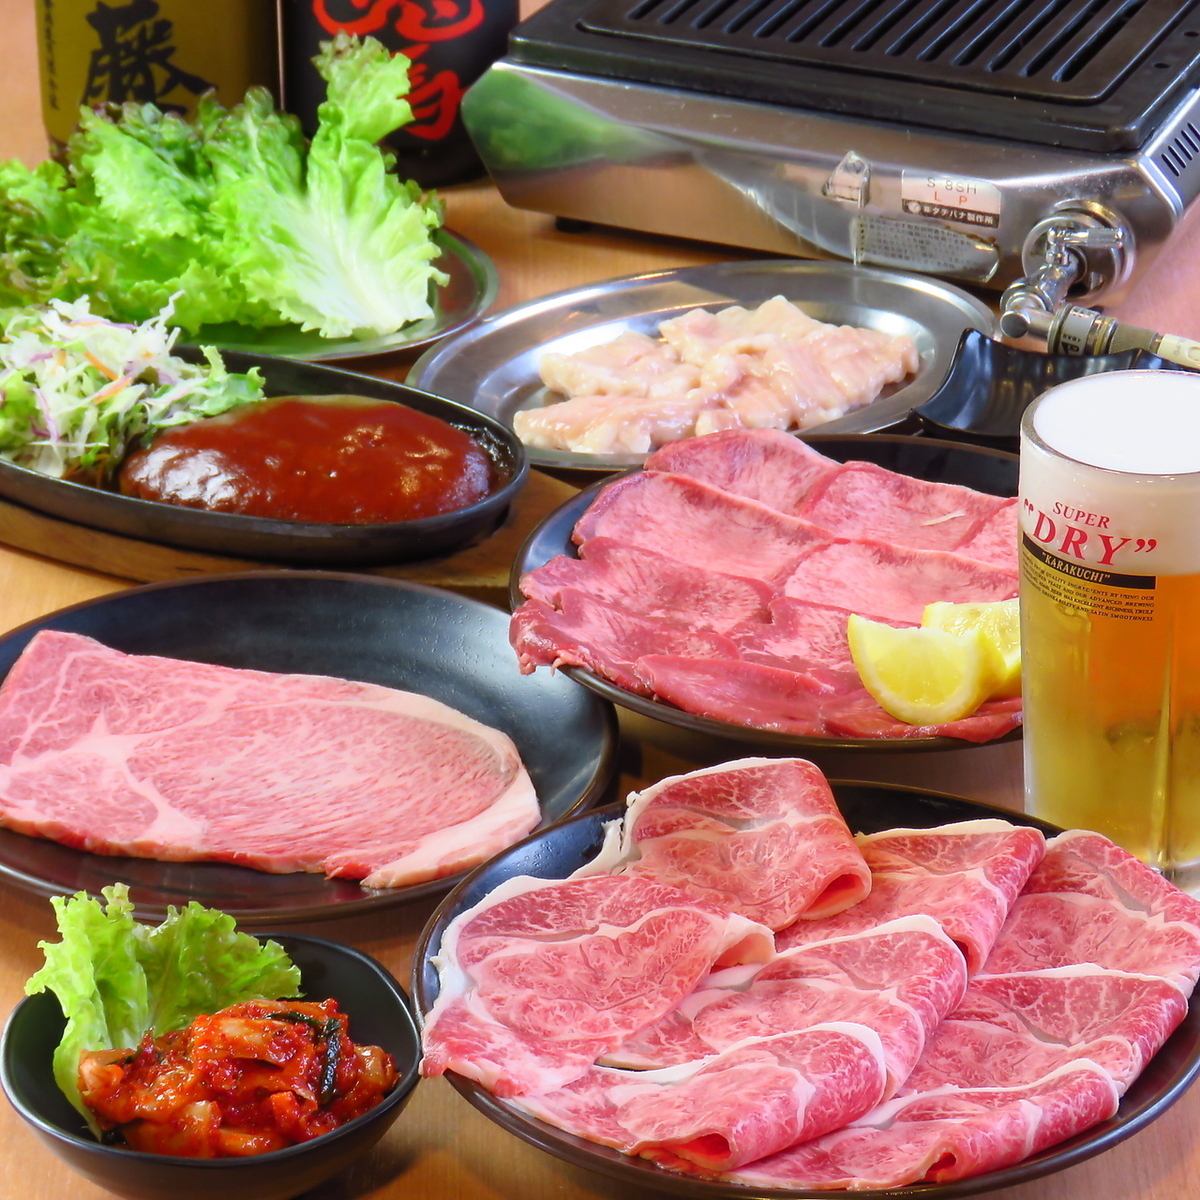 Perfect for families or drinking parties! Enjoy yakiniku in a relaxing tatami room.